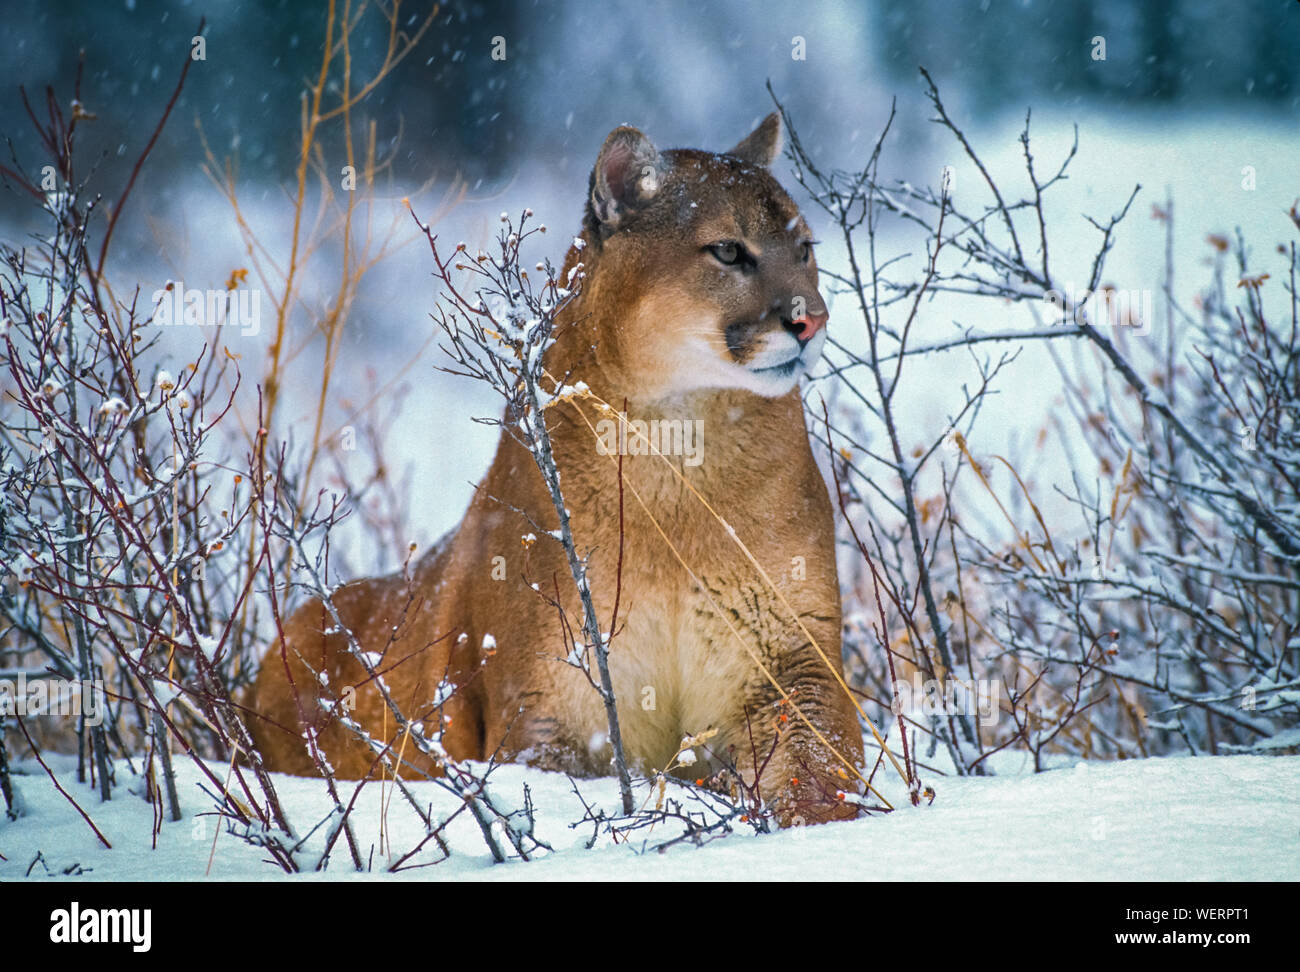 Cougar Resting Amidst Dead Plants During Snowfall Stock Photo